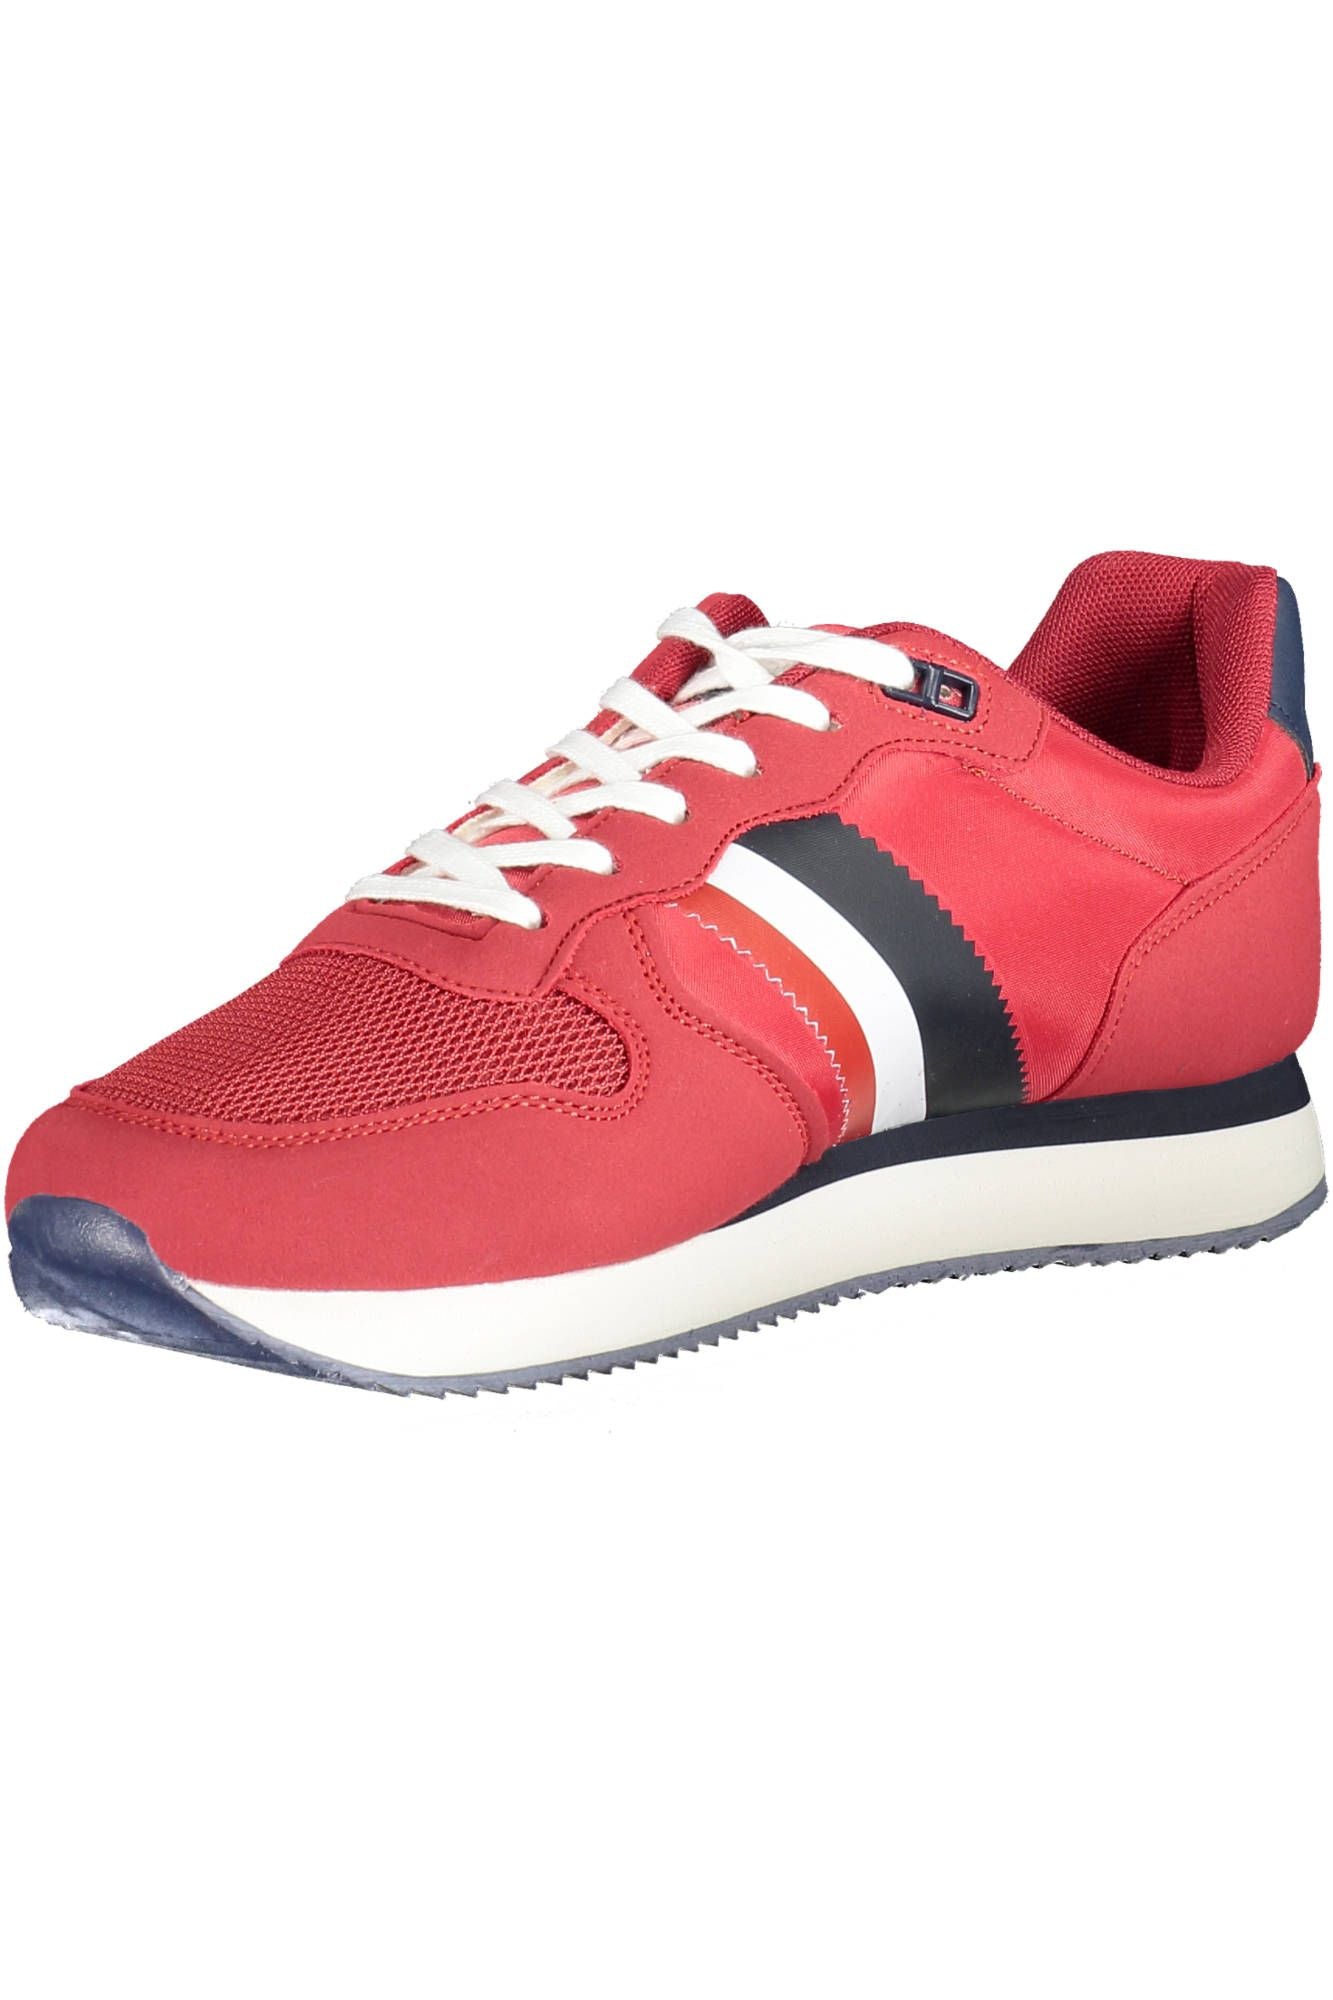 Chic Red Lace-Up Sports Sneakers